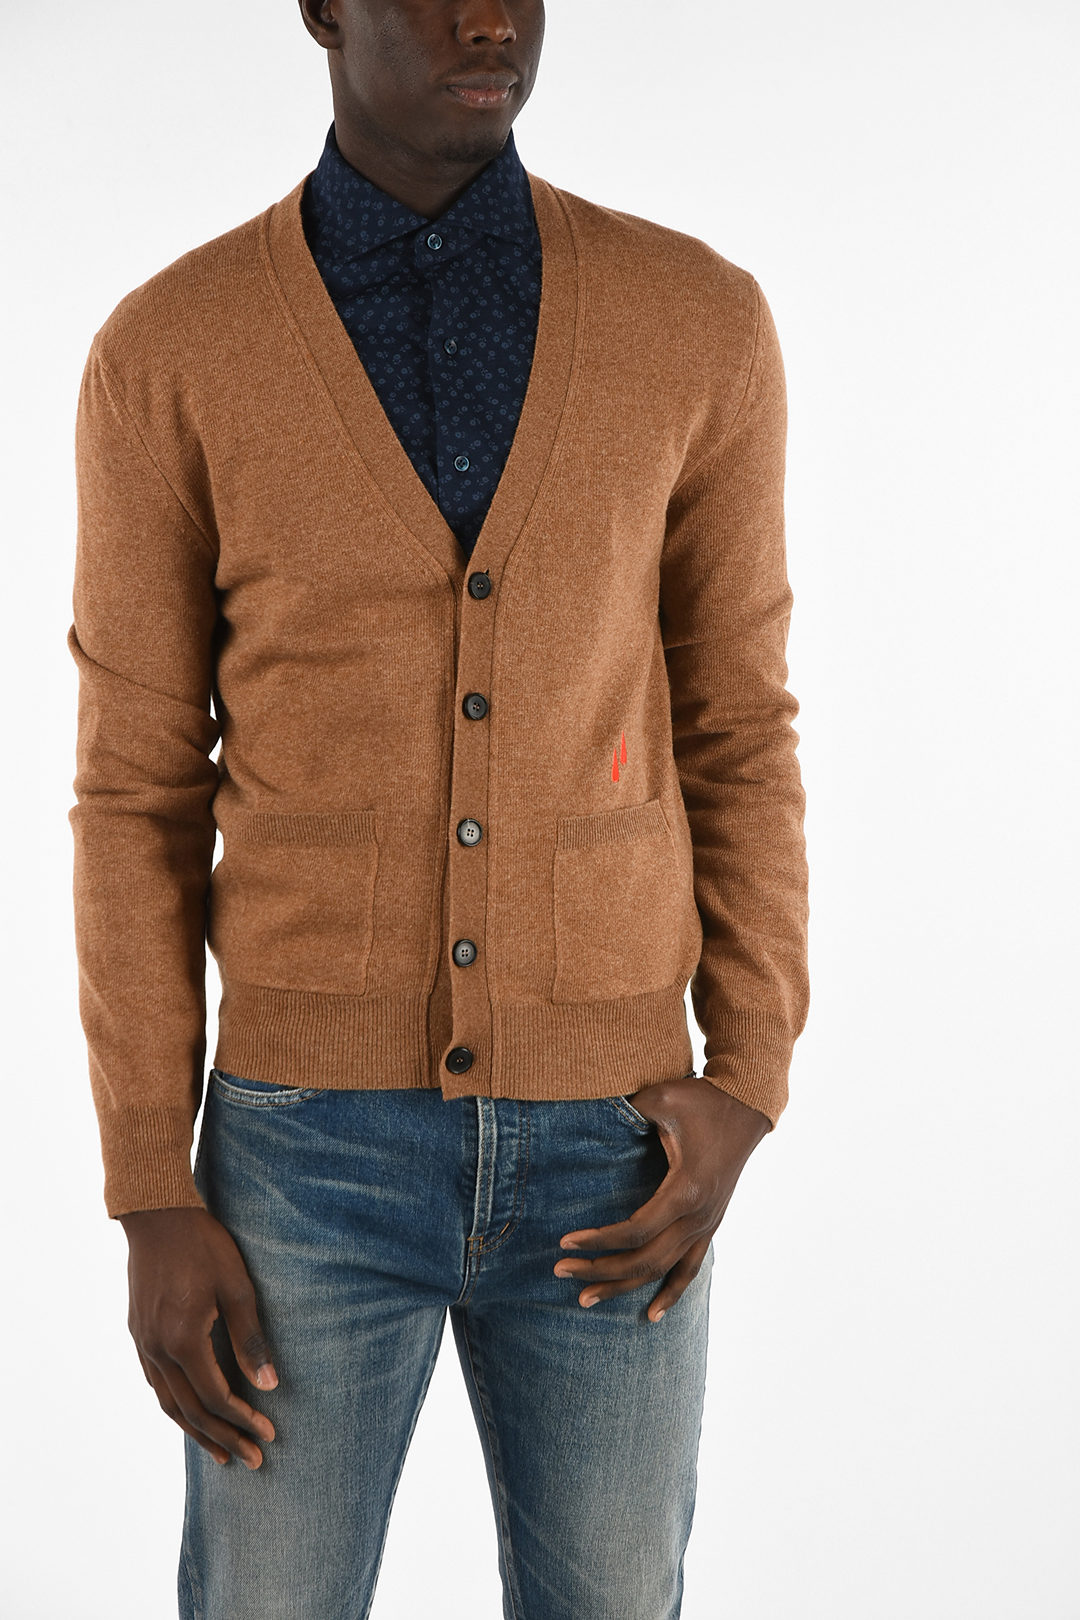 Calvin Klein Wool And Cotton Cardigan with pockets men - Glamood Outlet